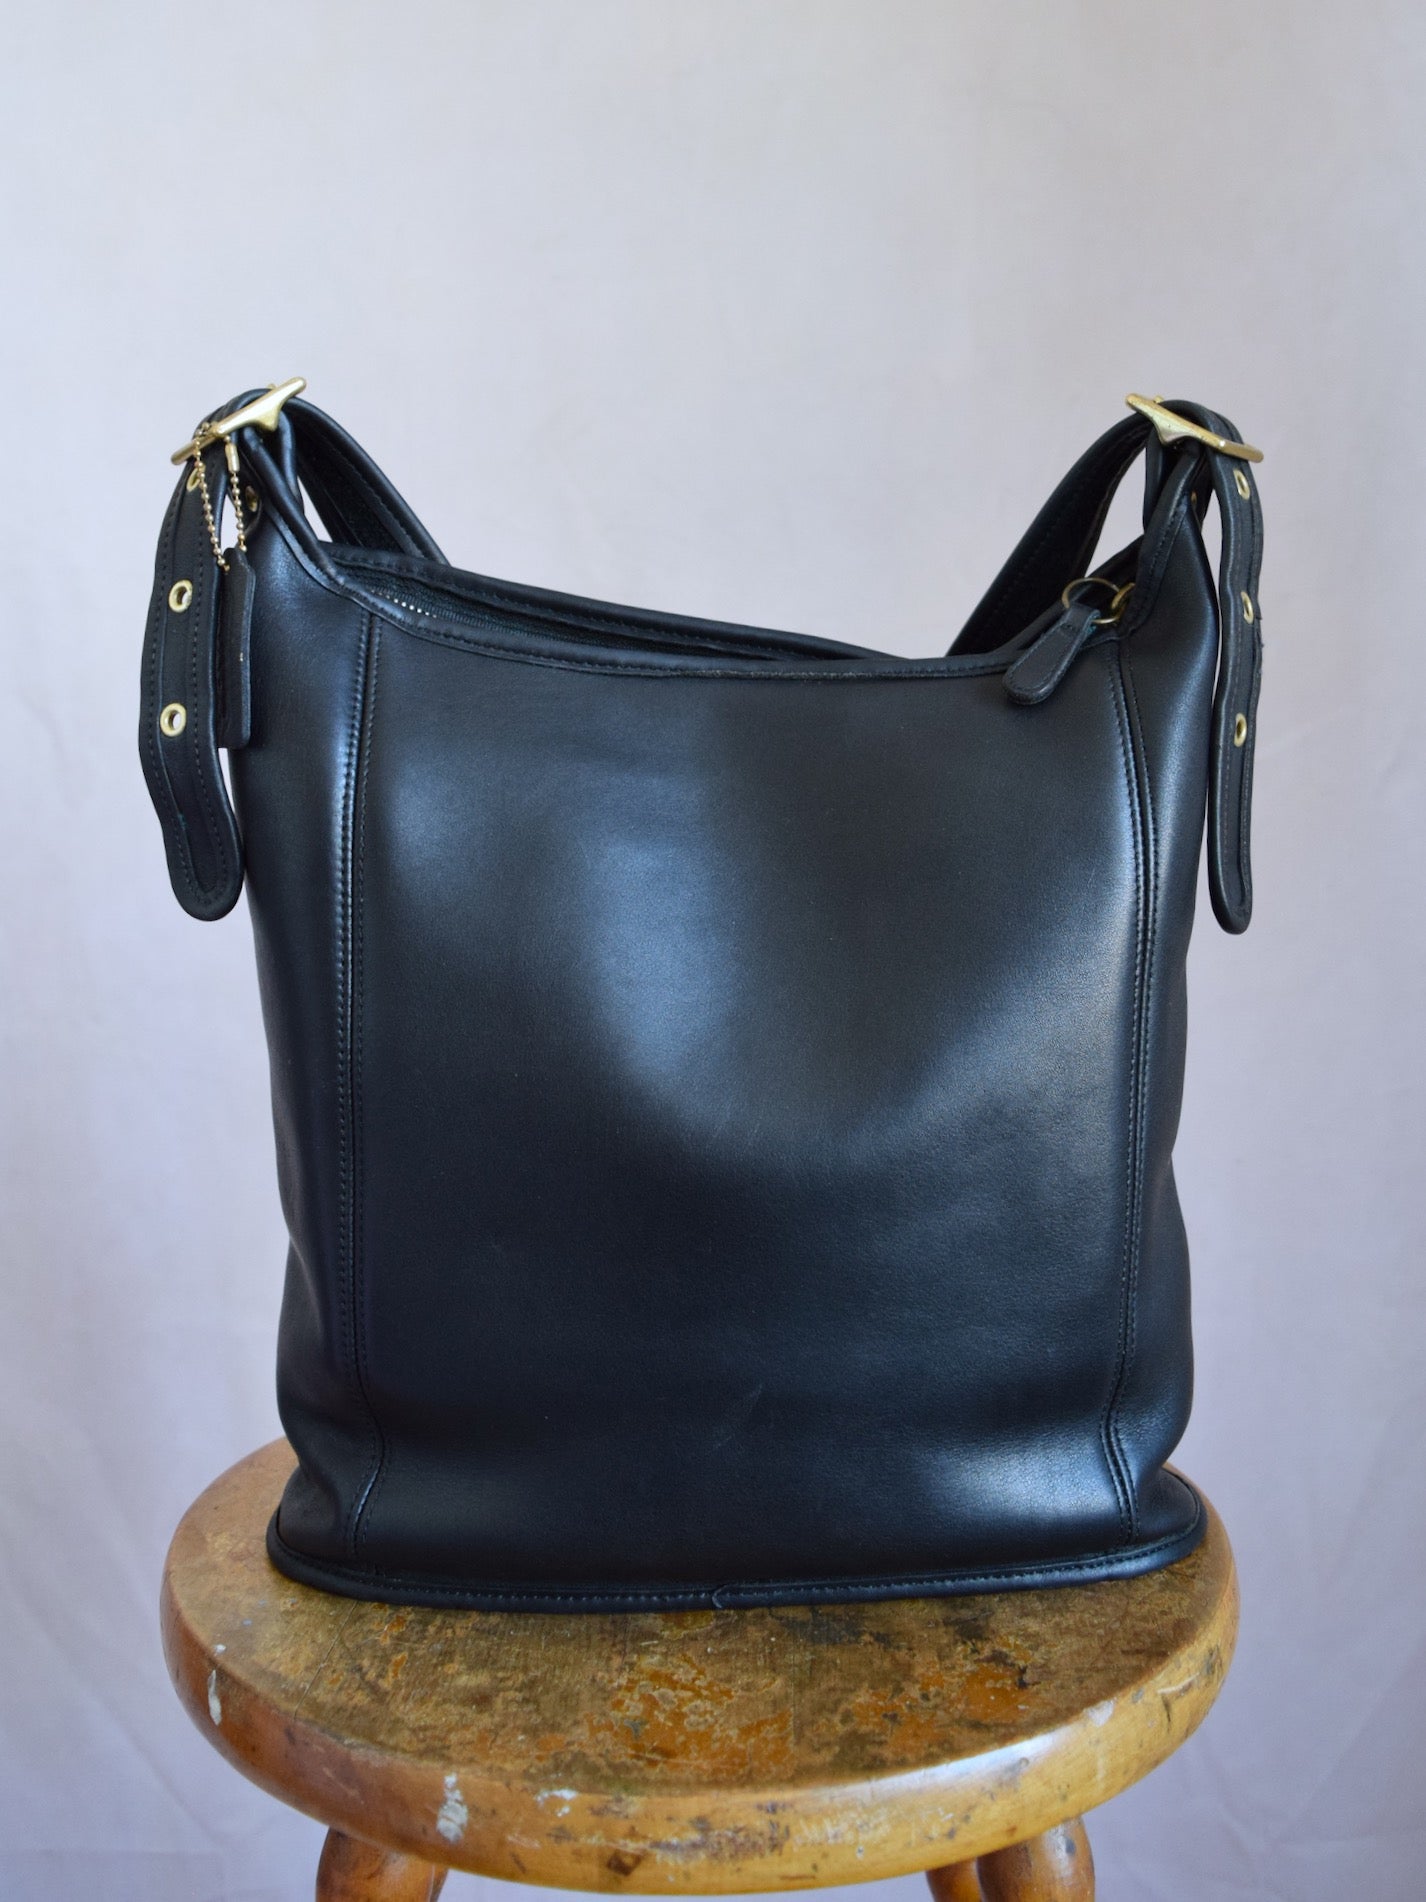 vintage Coach Slim Duffle Sac leather bag in black, style no 9060